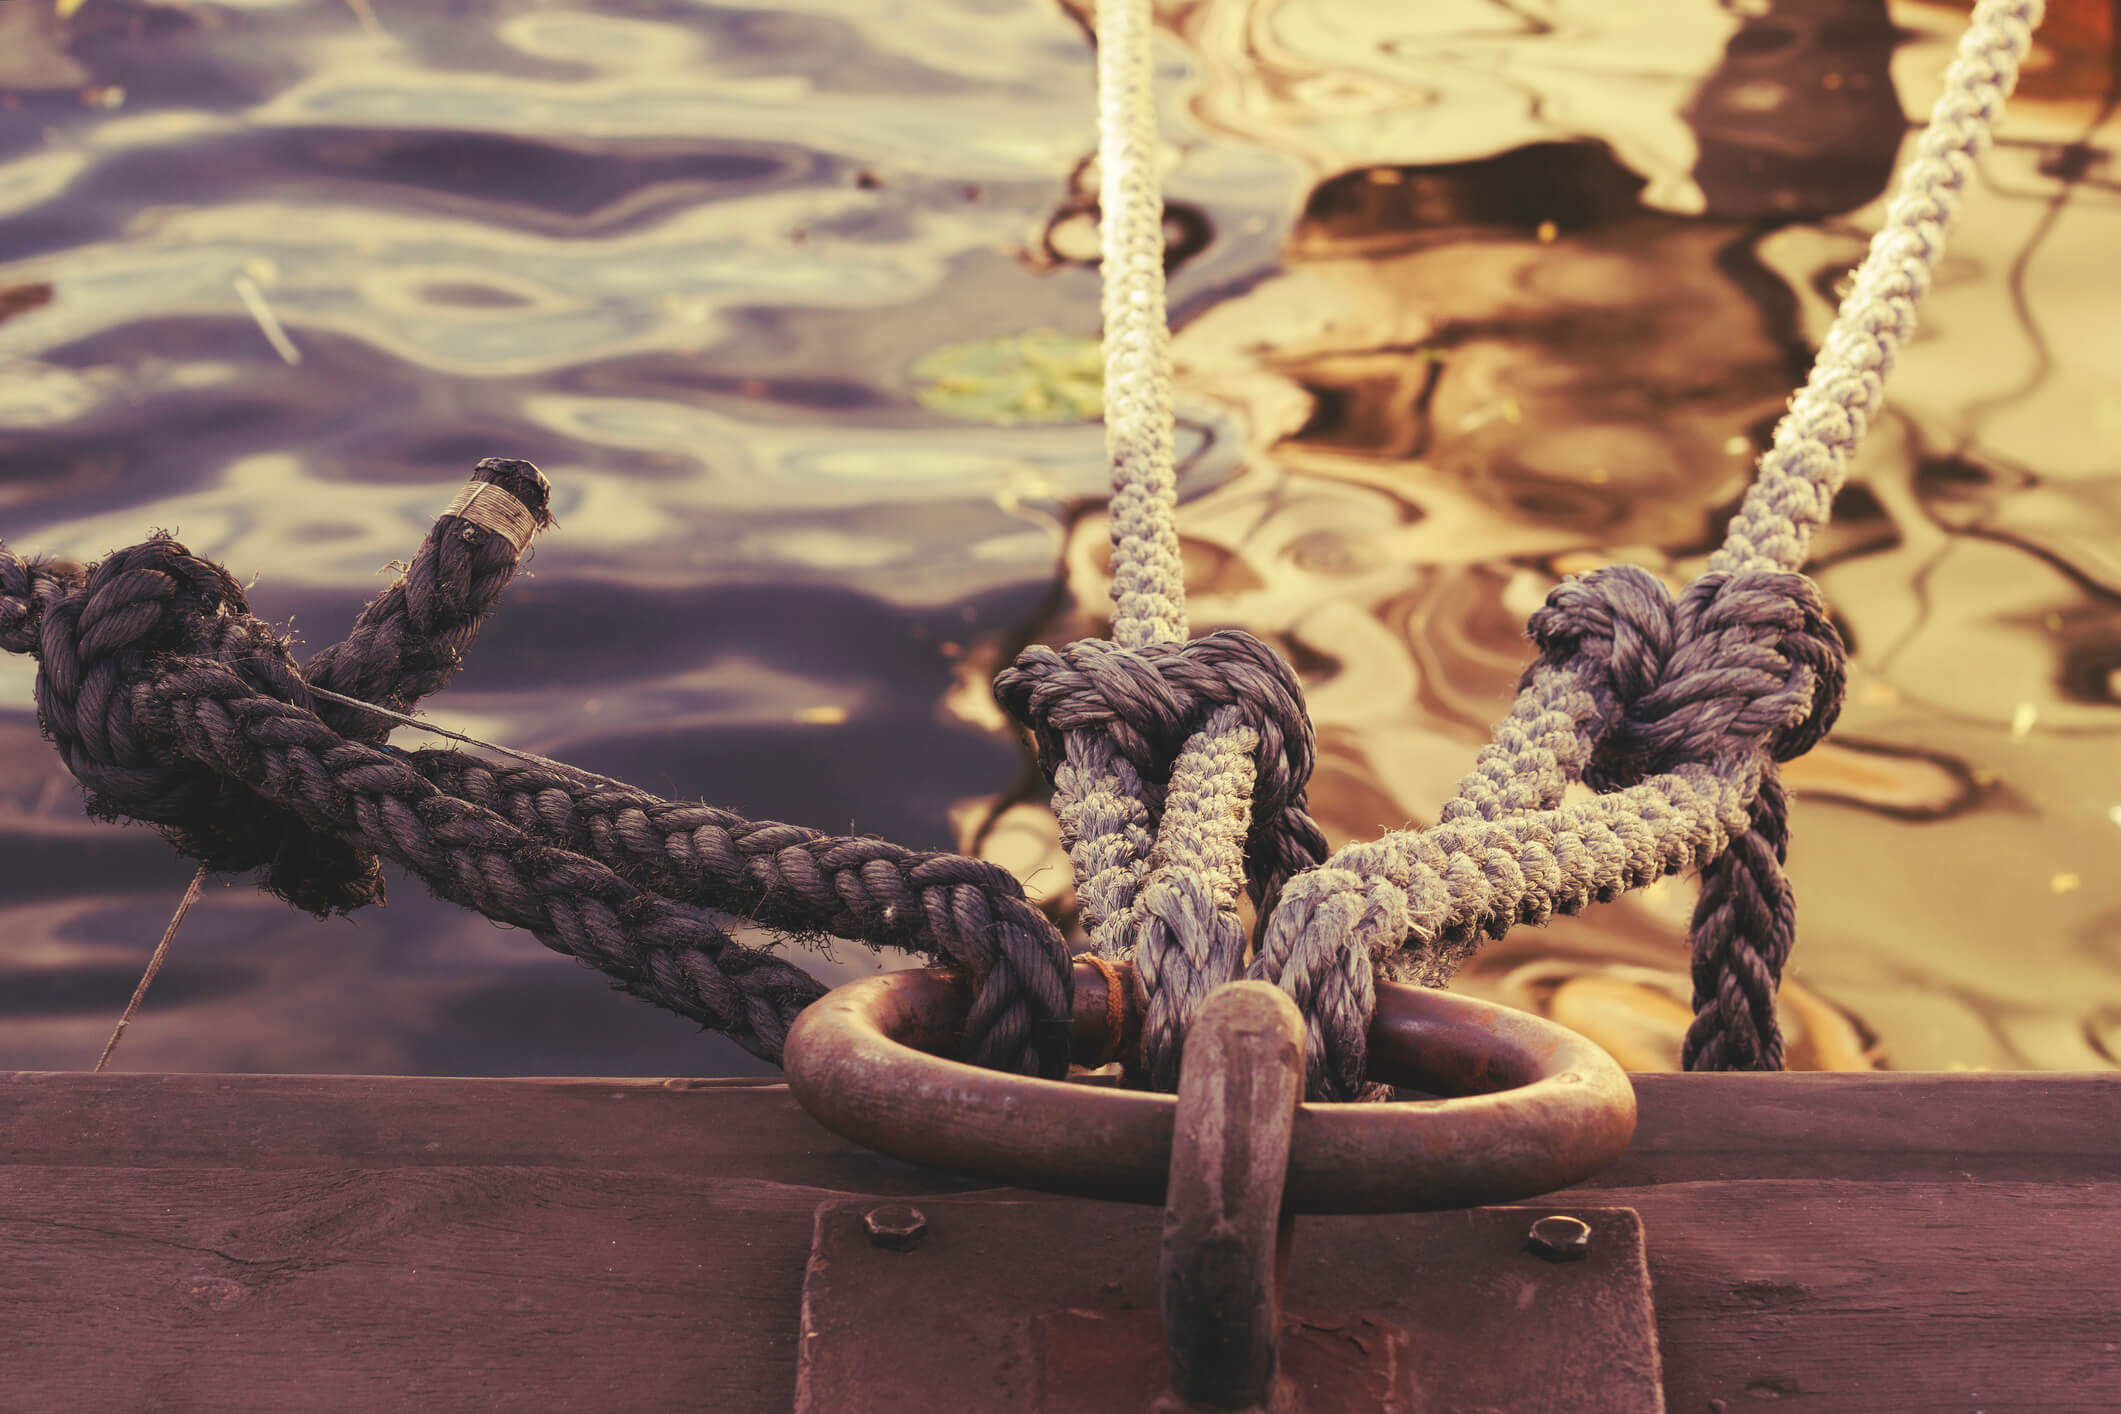 How do you effectively drop anchor and influence a customer?